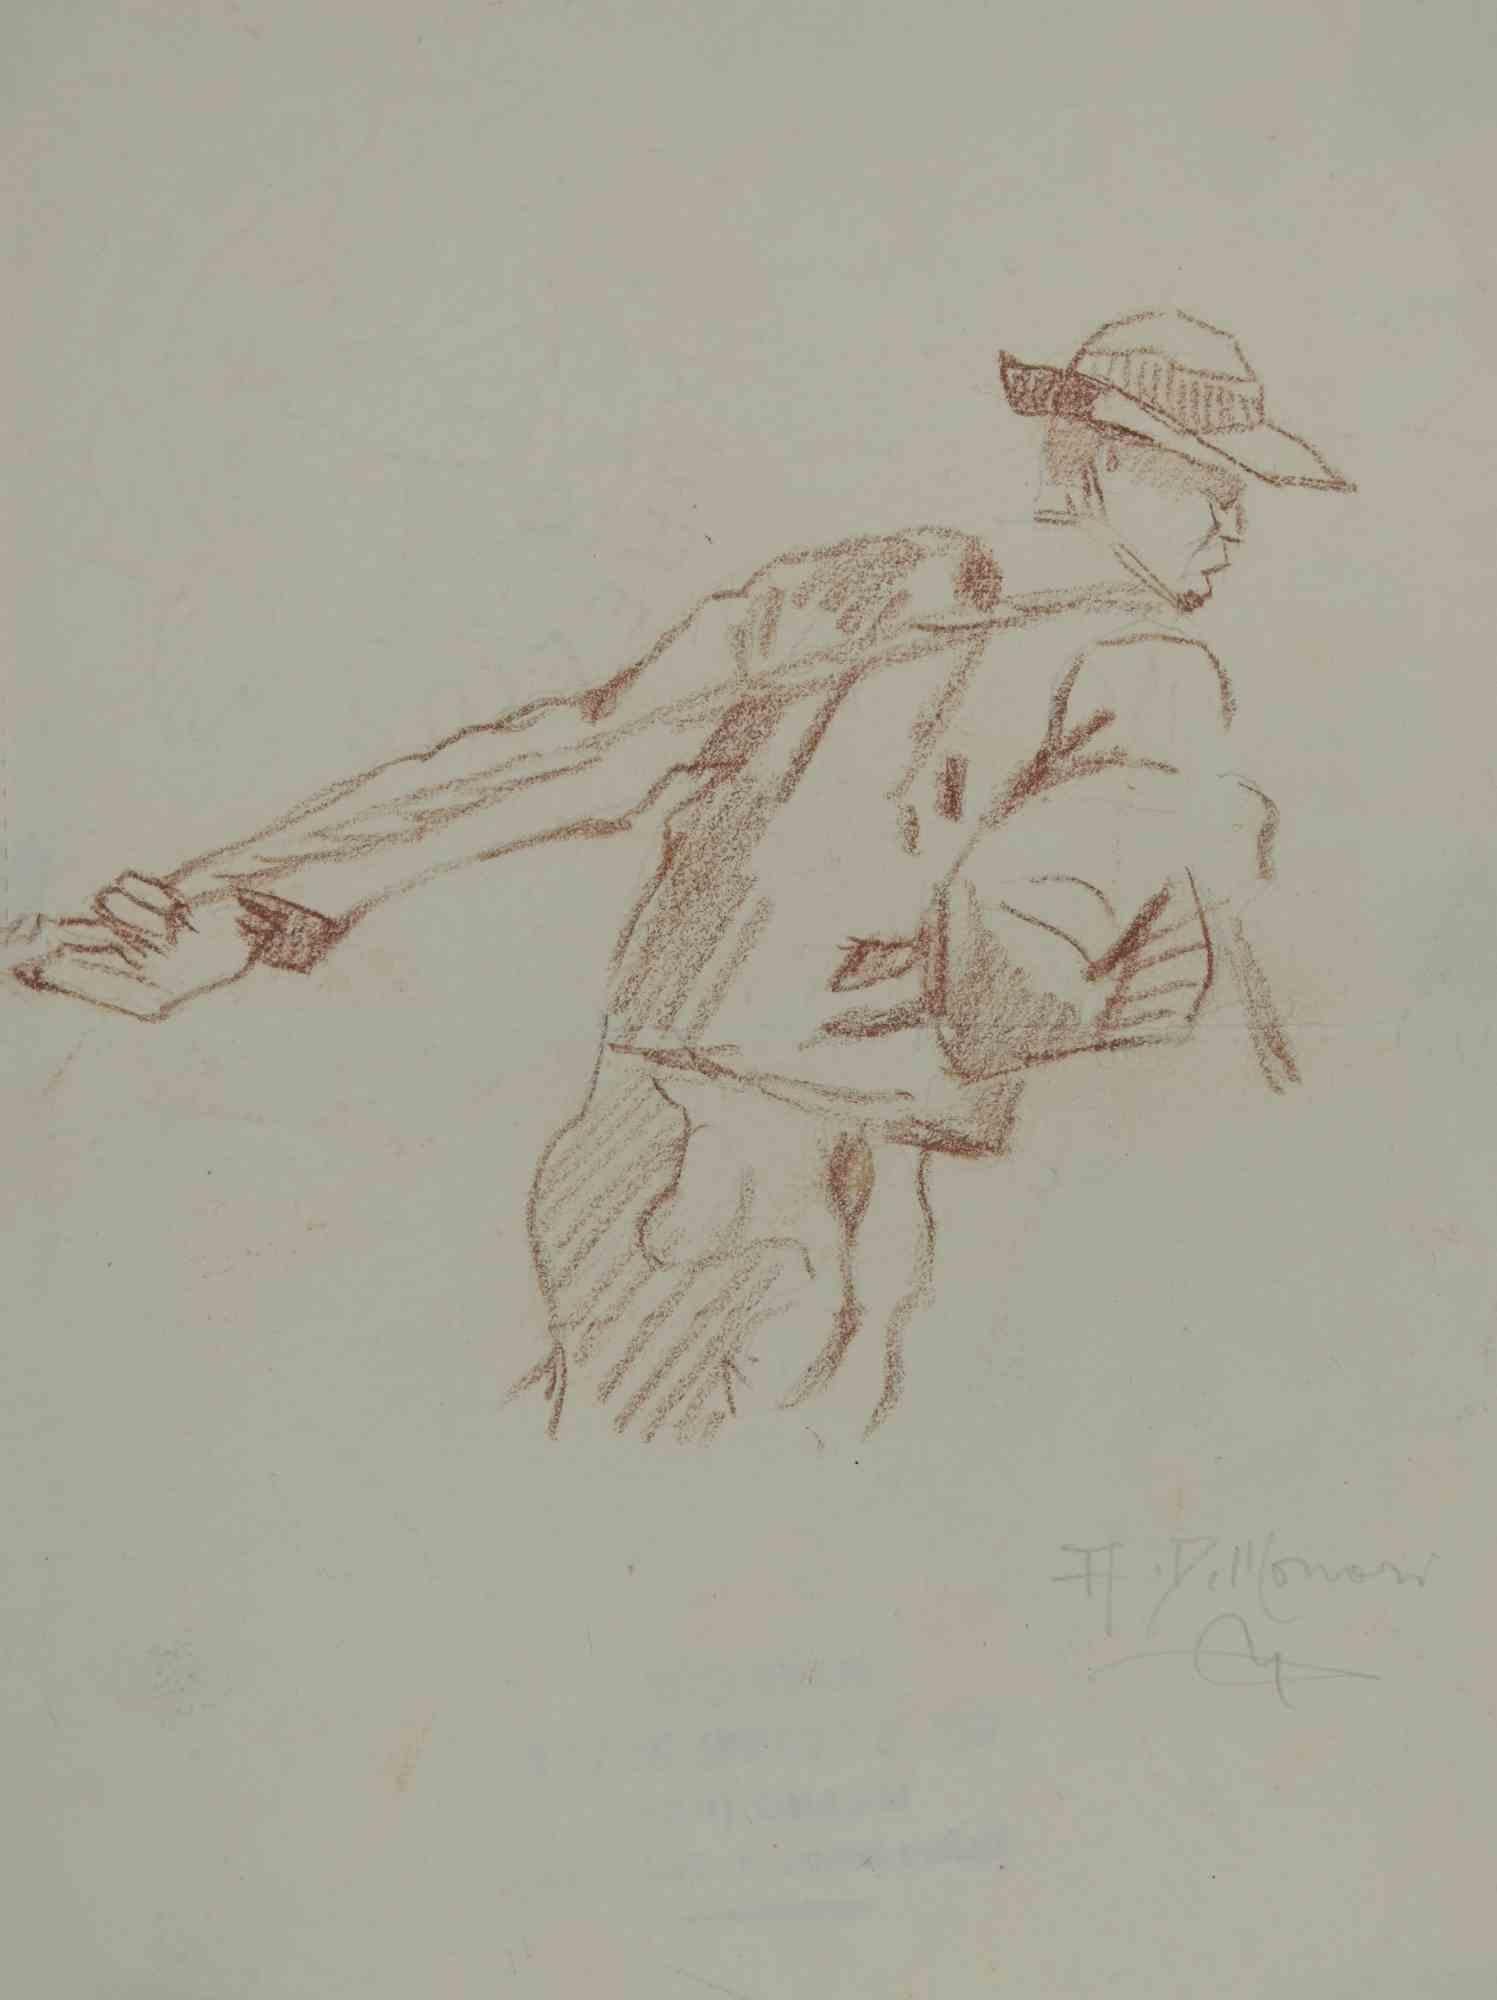 Peasant is a Drawing in pencil realized by  Augusto Monari in the Early-20th Century.

Hand-signed on the lower.

Good conditions, including an ivory-colored Passepartout.

The artwork is depicted through confident strokes in a well-balanced